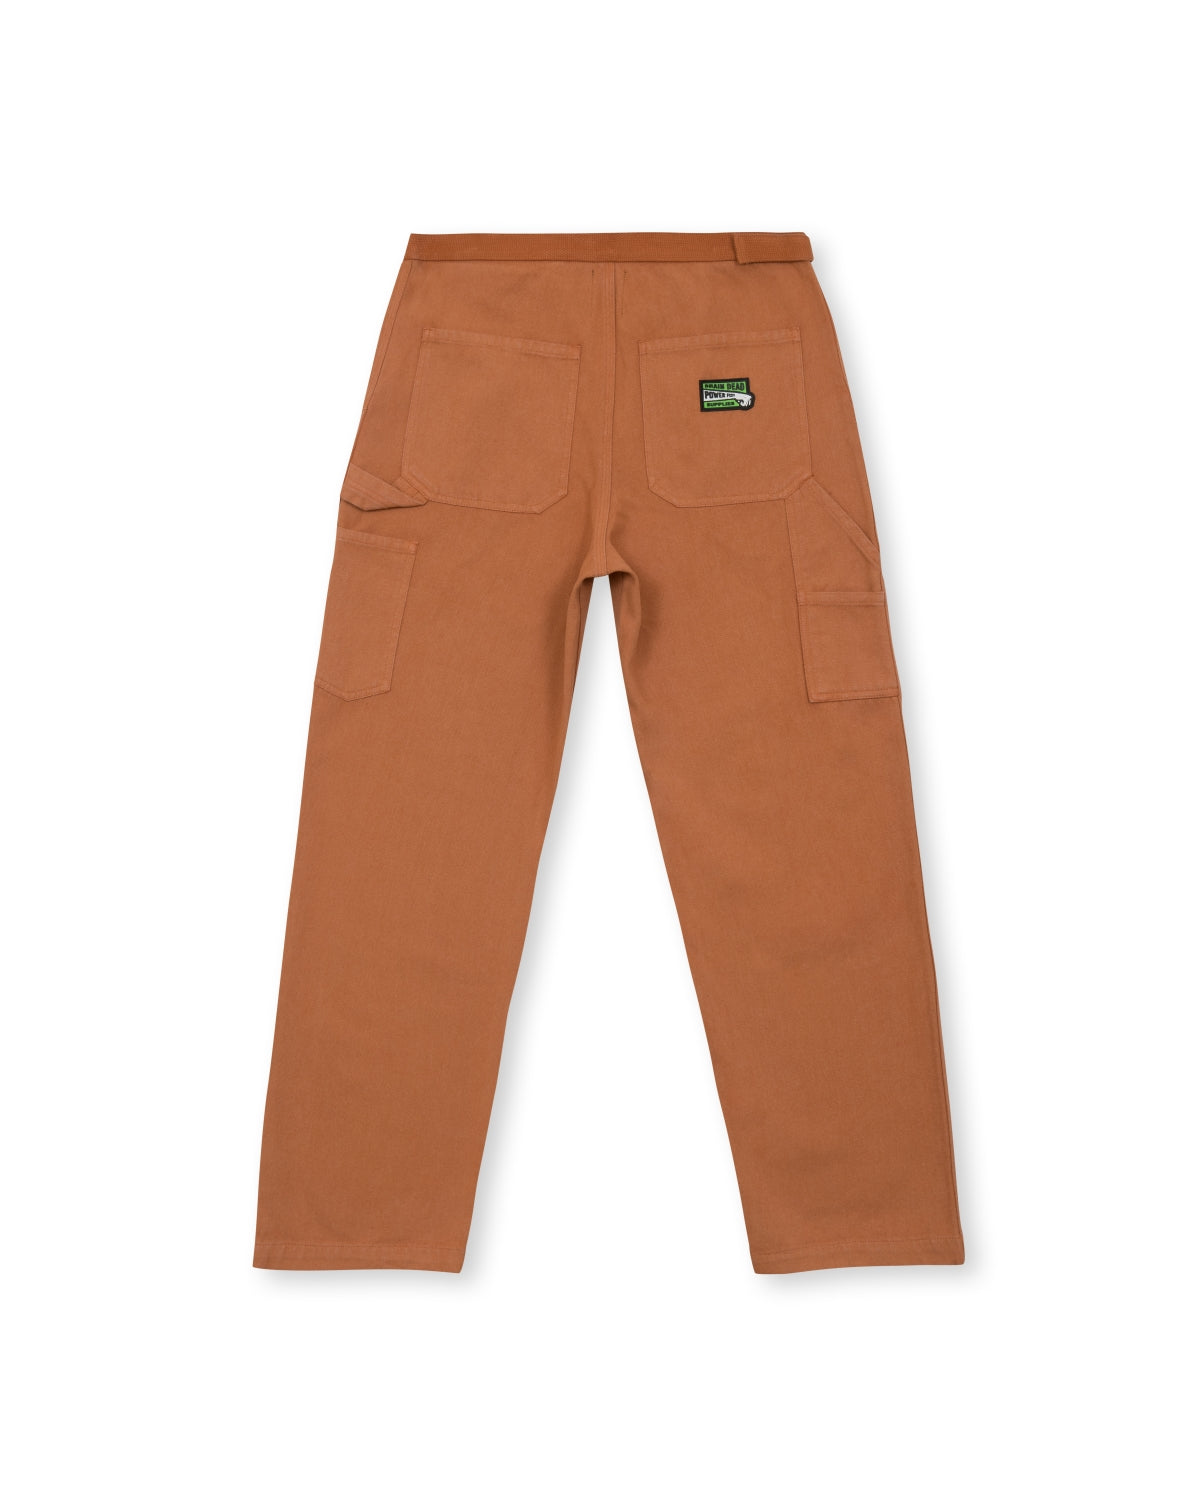 Washed Hard Ware/ Soft Wear Carpenter Pant - Duck Brown 2